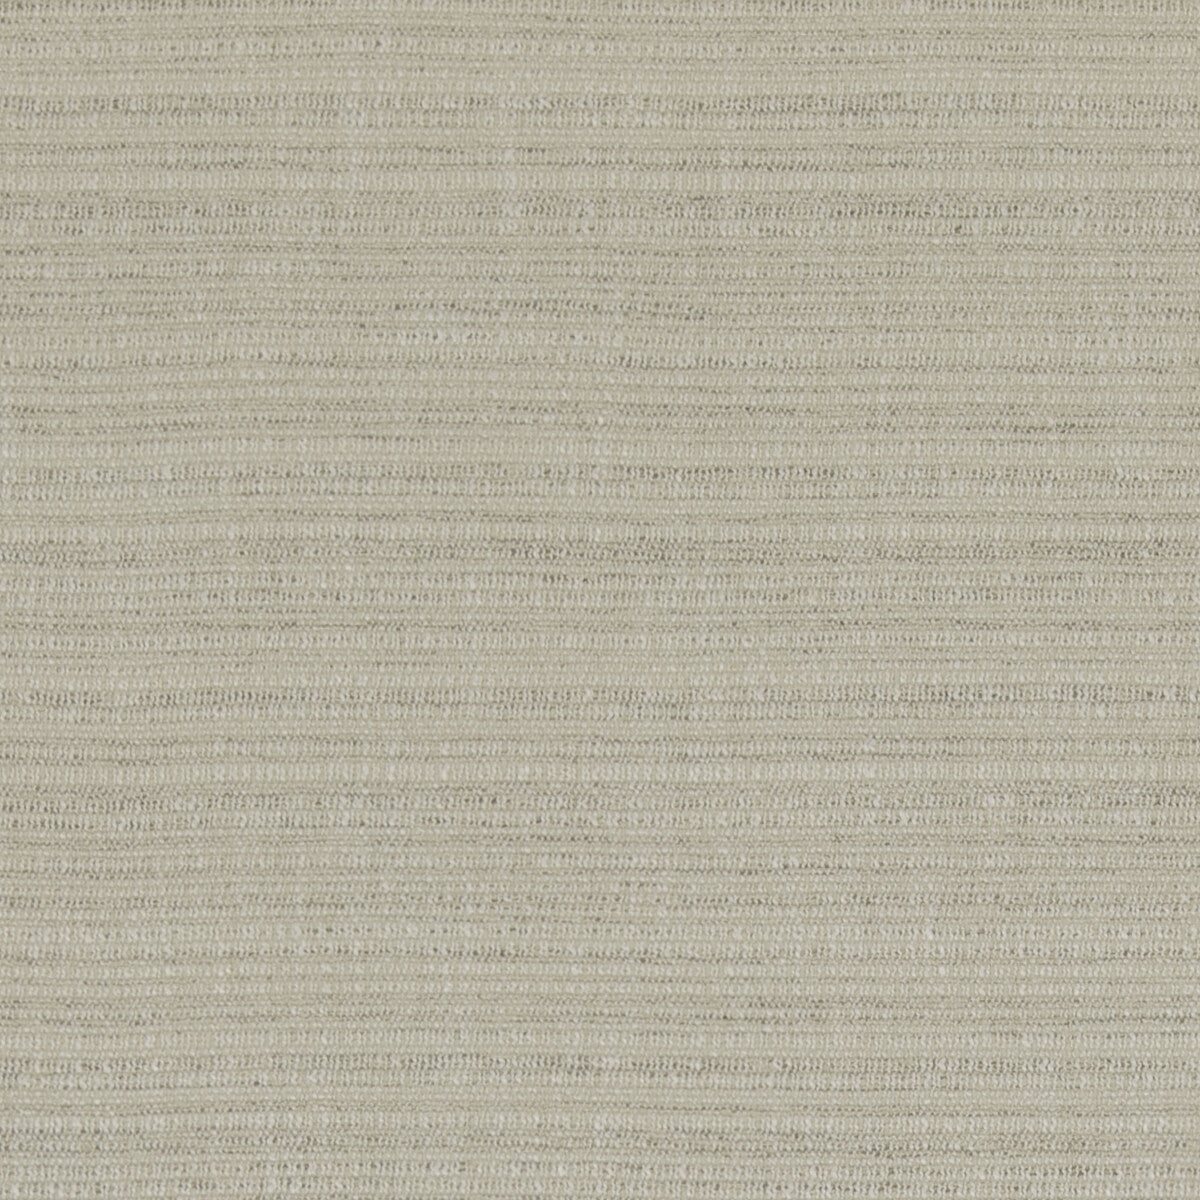 Mendoza fabric in ivory color - pattern ED85368.104.0 - by Threads in the Quintessential Textures collection